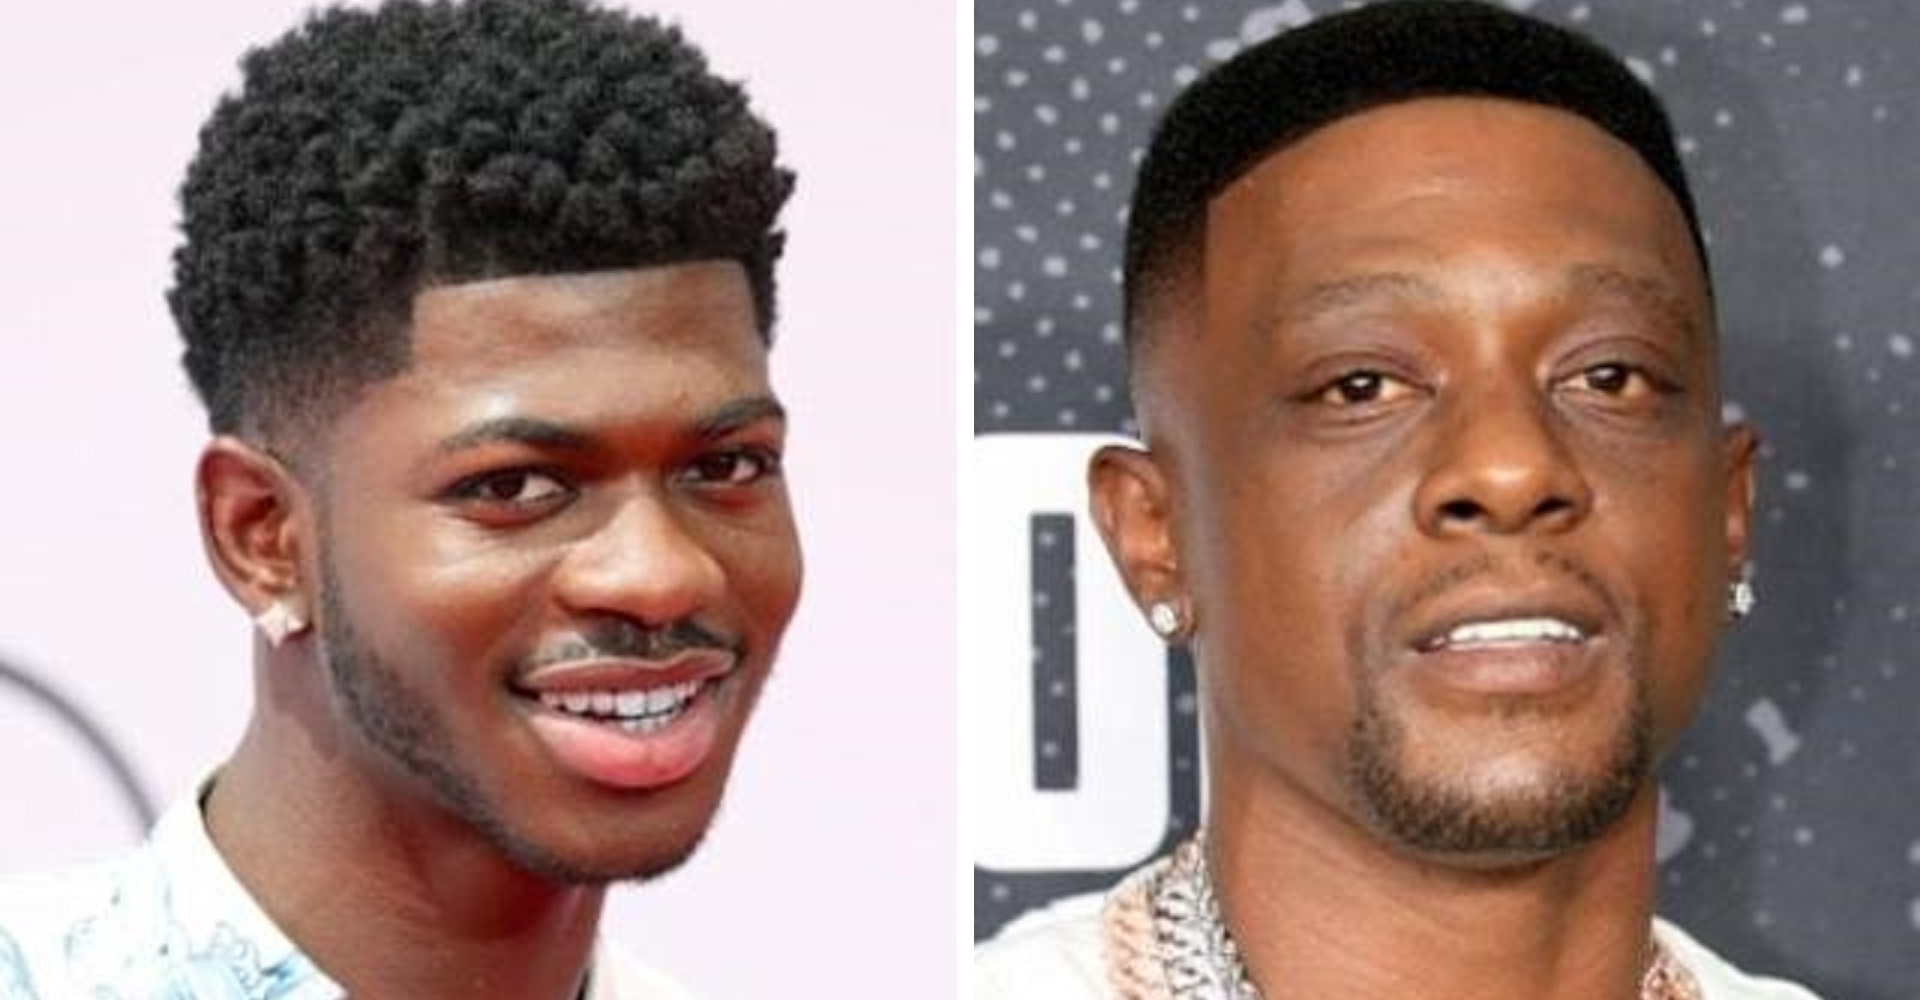 Boosie Defends His Homophobic Comments, But Lil Nas X Gets The Last Laugh With His Reply